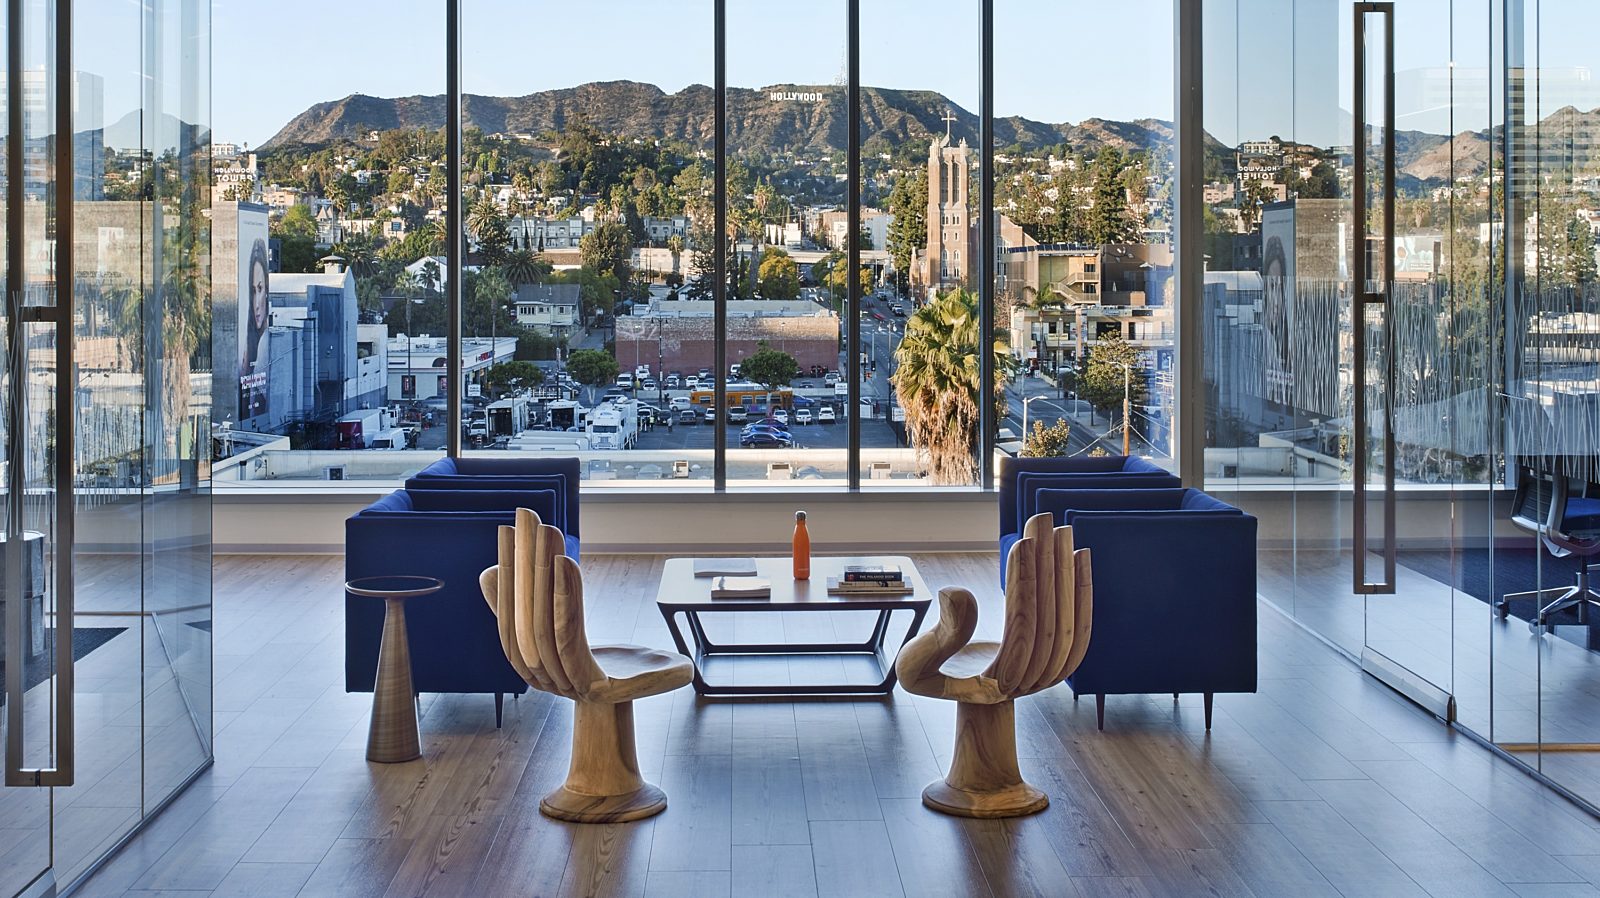 A lounge space in front of glass walls that reveal a distant view of the Hollywood hills. The lounge space features two chairs that resemble hands.